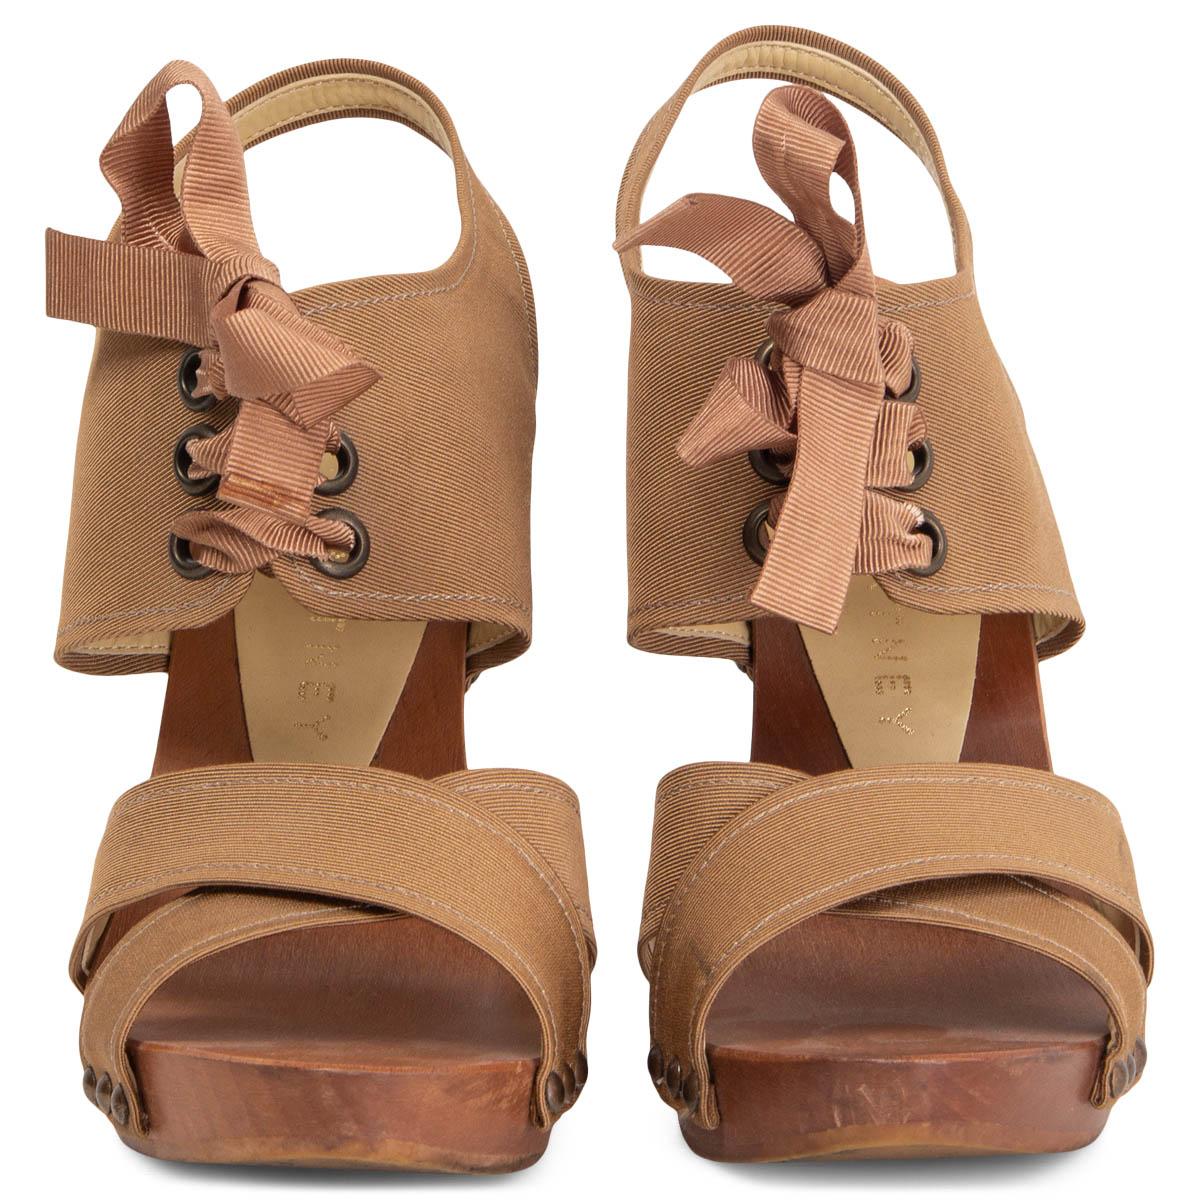 100% authentic Stella McCartney lace-up platform sandals with a brown wooden sole and heel featuring brown grosgrain fabric. Have been worn and are in excellent condition. 

Measurements
Imprinted Size	37
Shoe Size	37
Inside Sole	24cm